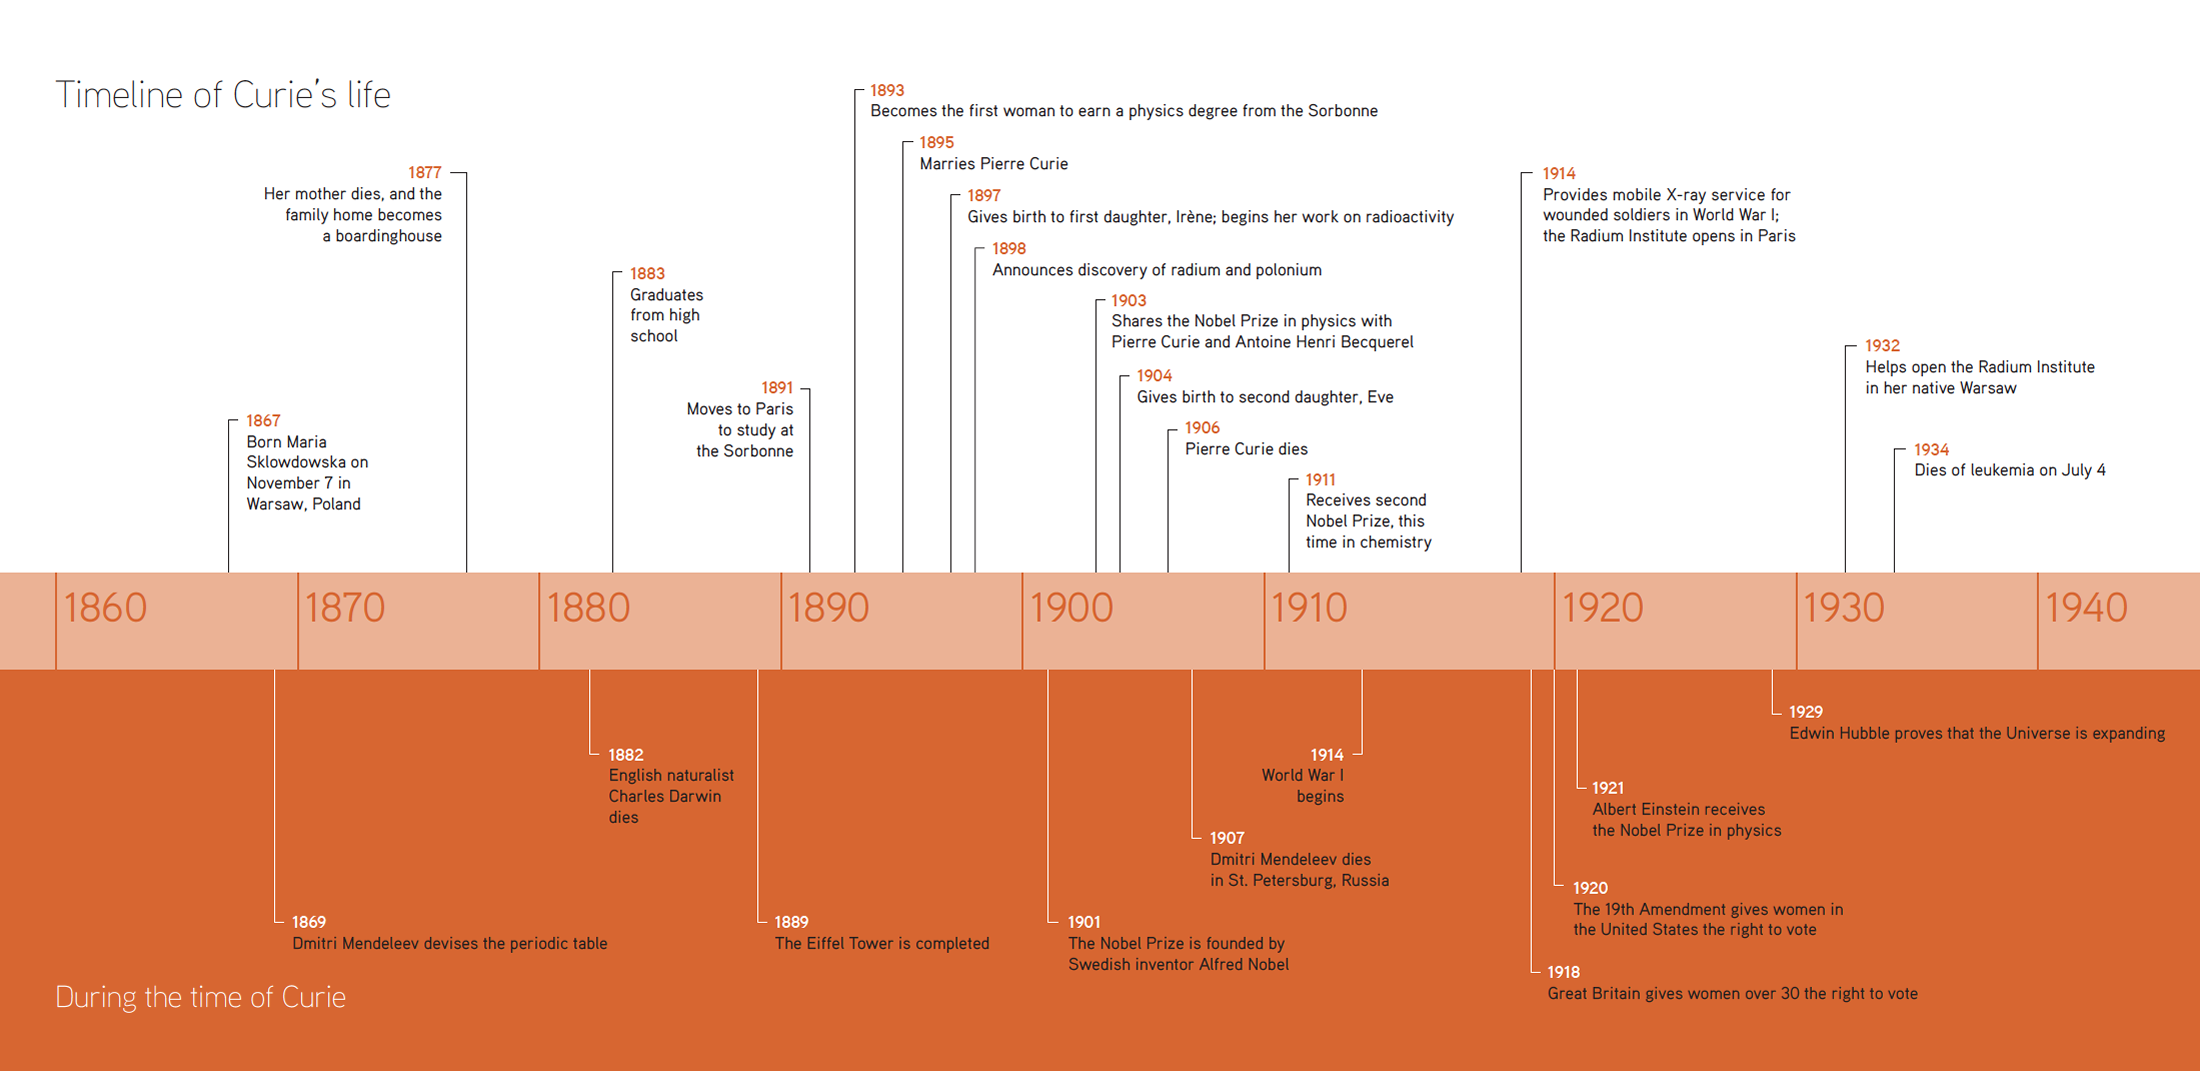 marie curie timeline